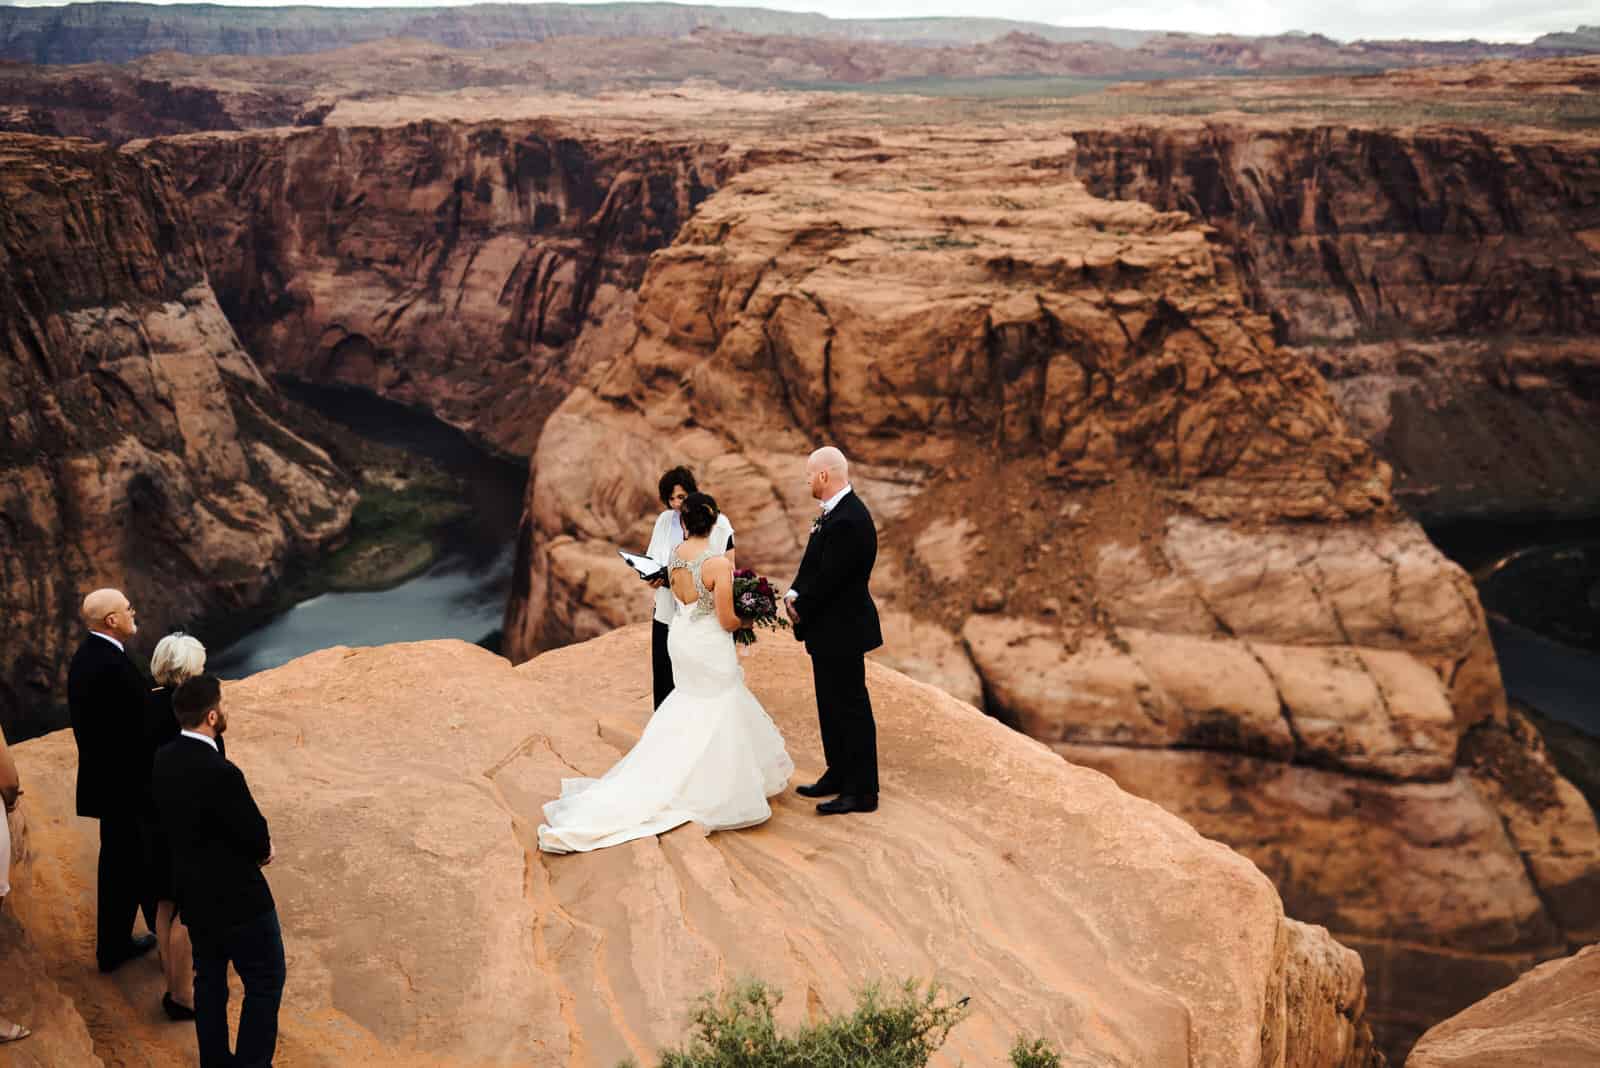 Standing during their ceremony at Horseshoe Bend